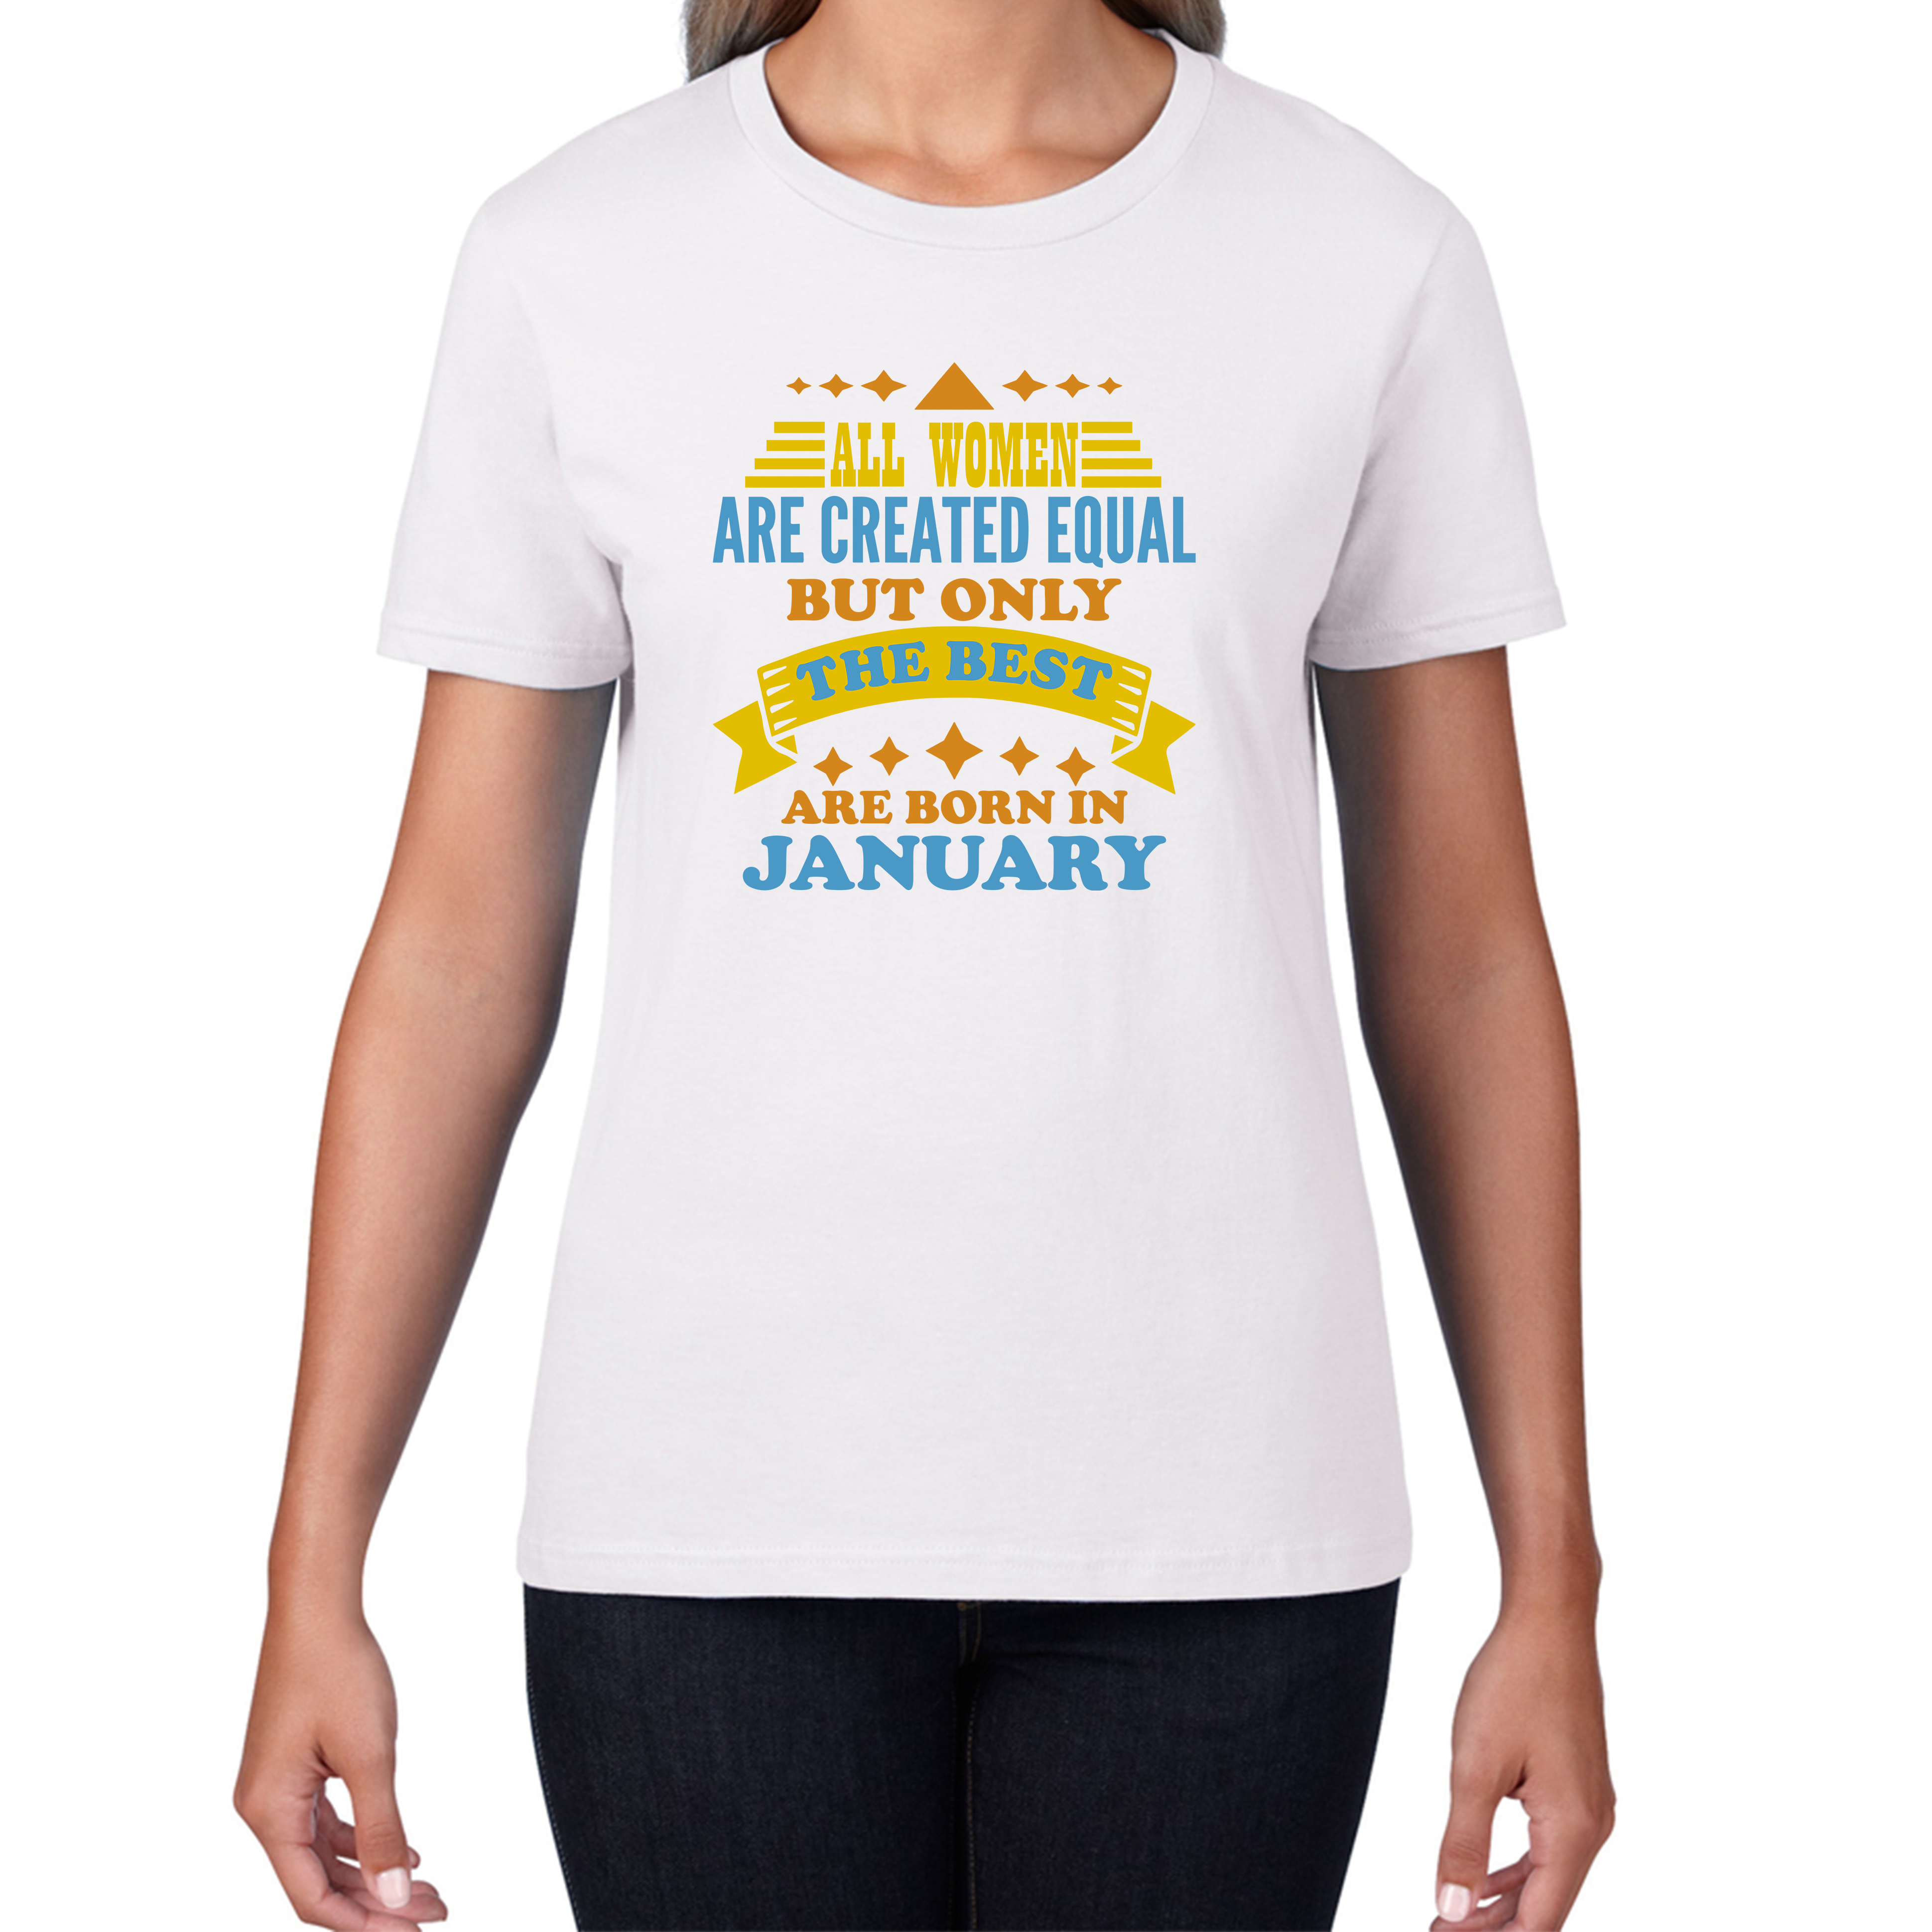 All Women Are Created Equal But Only The Best Are Born In January Funny Birthday Quote Womens Tee Top